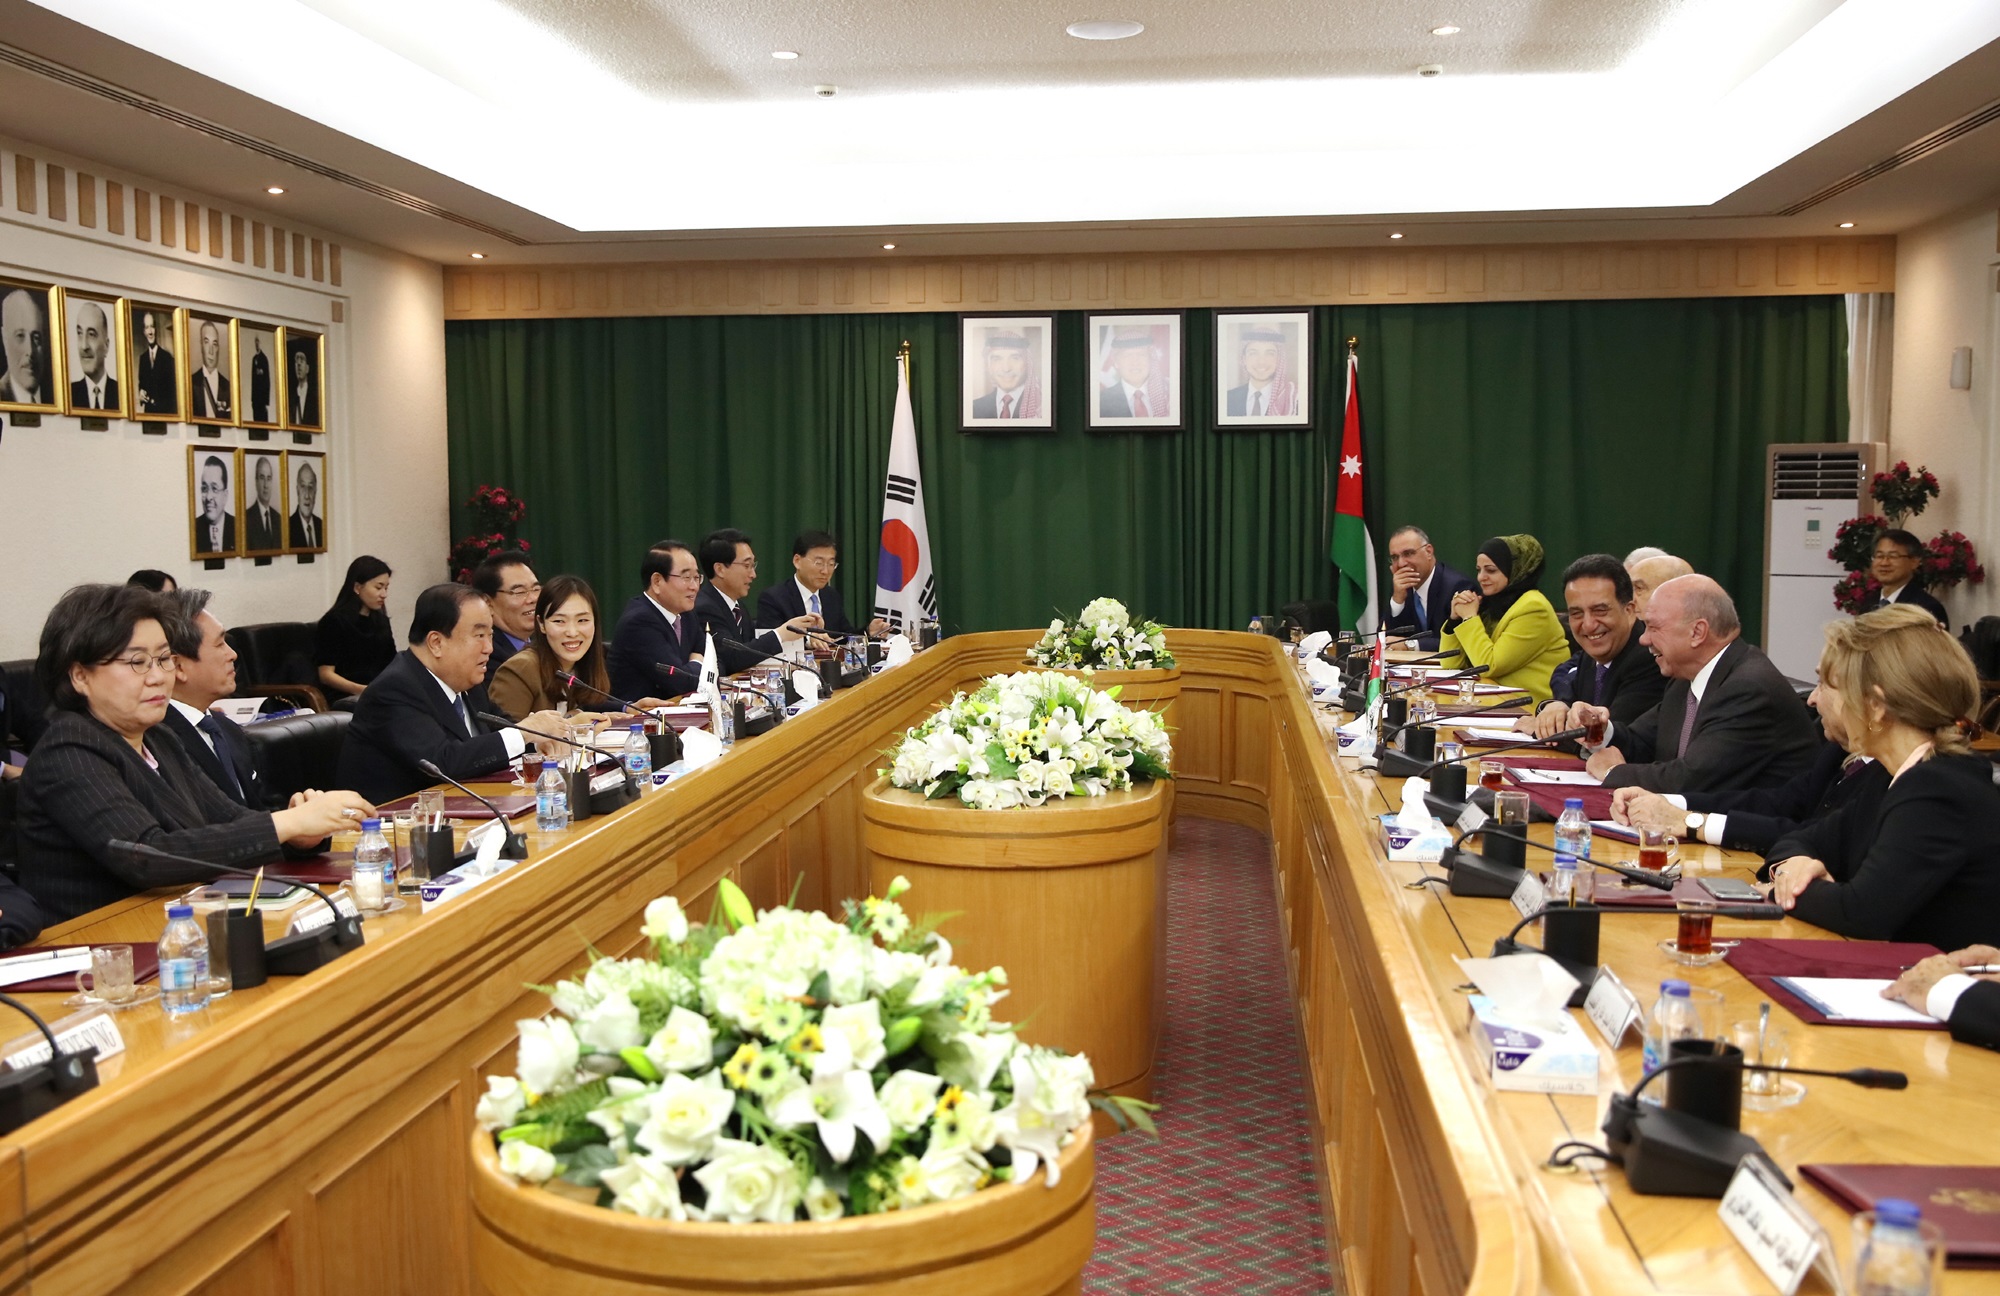 Speaker of the ROK National Assembly holds meetings with the speakers of the Jordanese Senate and House of Representatives